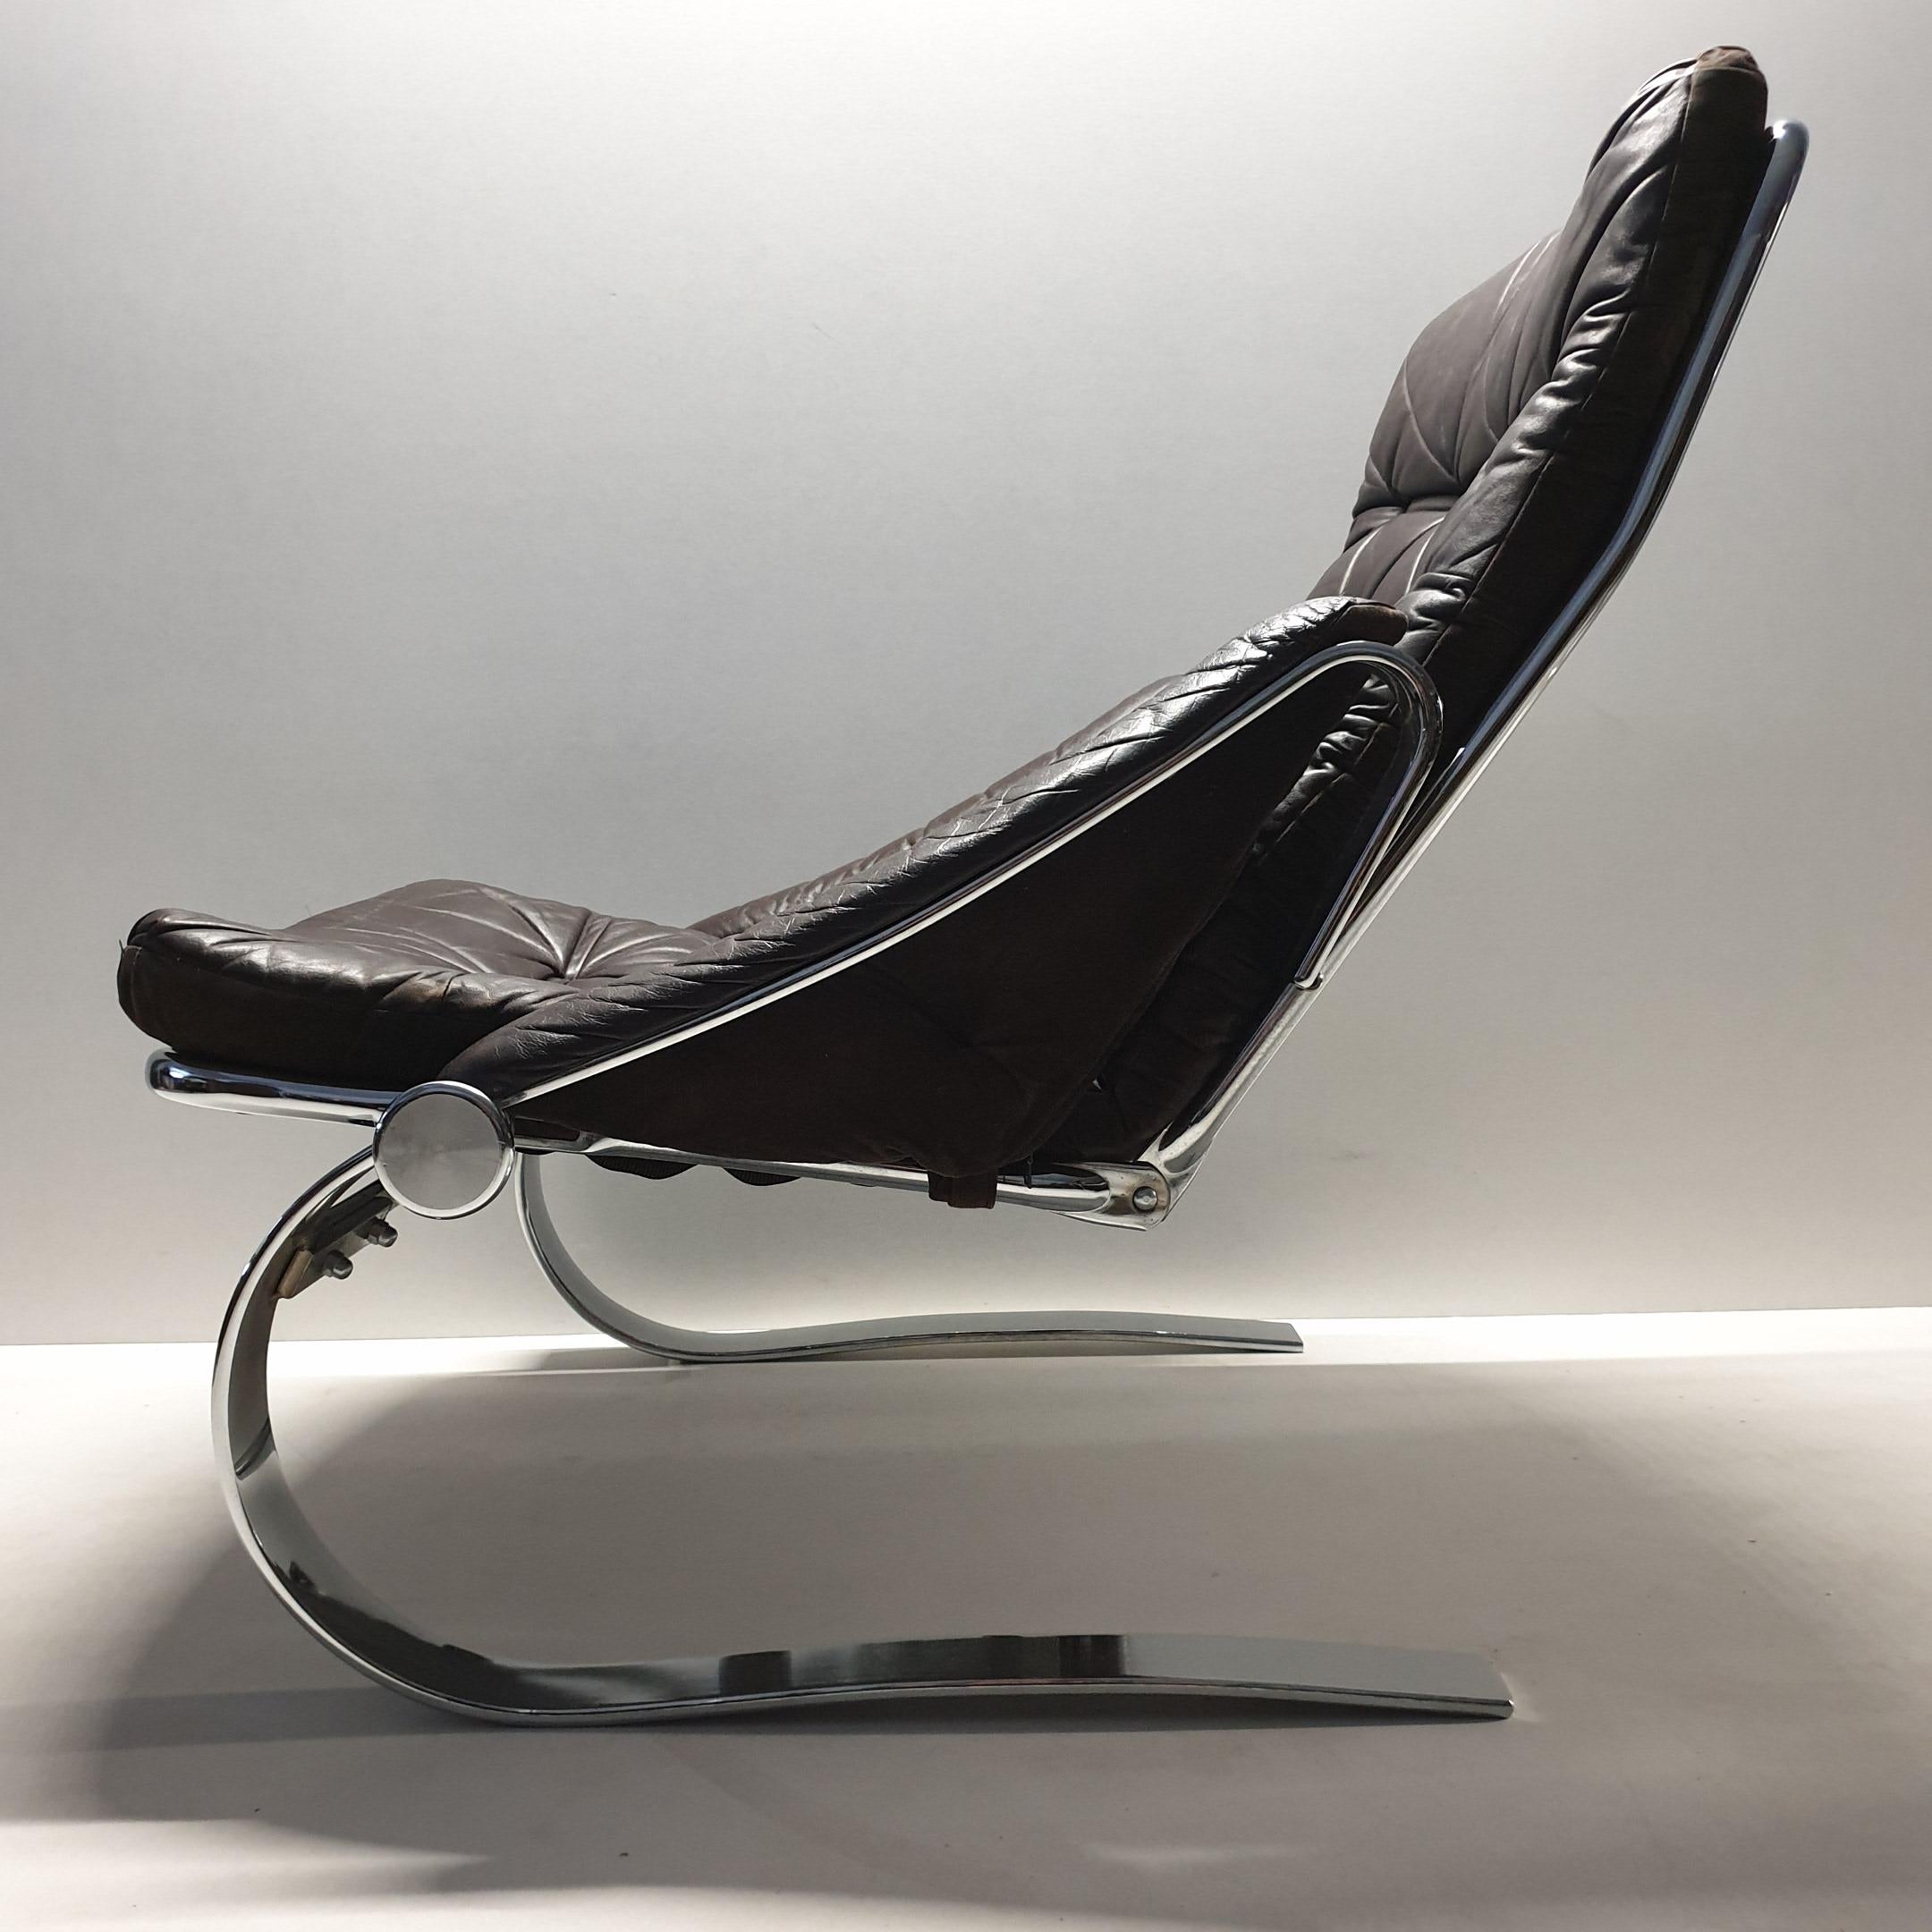 Scandinavian chrome flat steel and leather lounge chair with an adjustable backrest.

Comfortable heavy armchair with a chromed spring steel frame and the original brown leather upholstery.
The back of the upholstery is velvet.
The position of